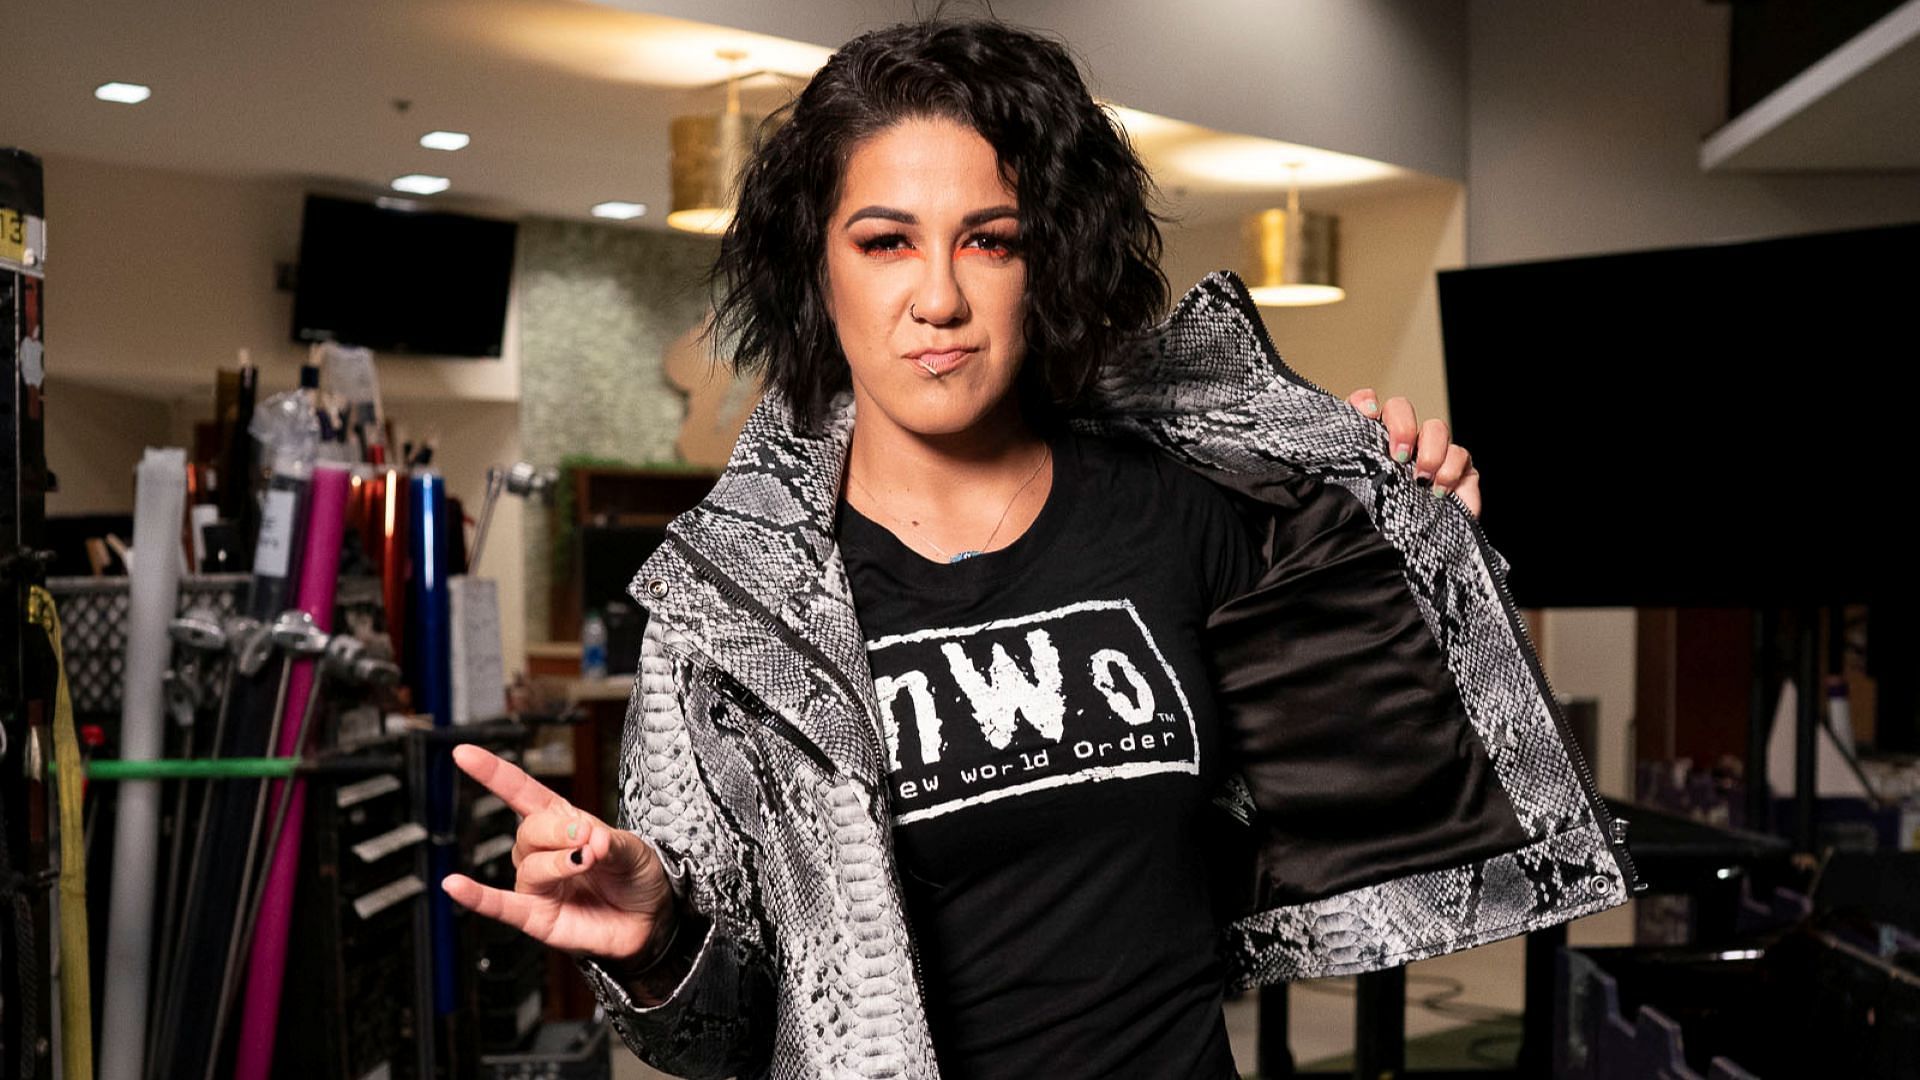 WWE Superstar Bayley represents the NWO